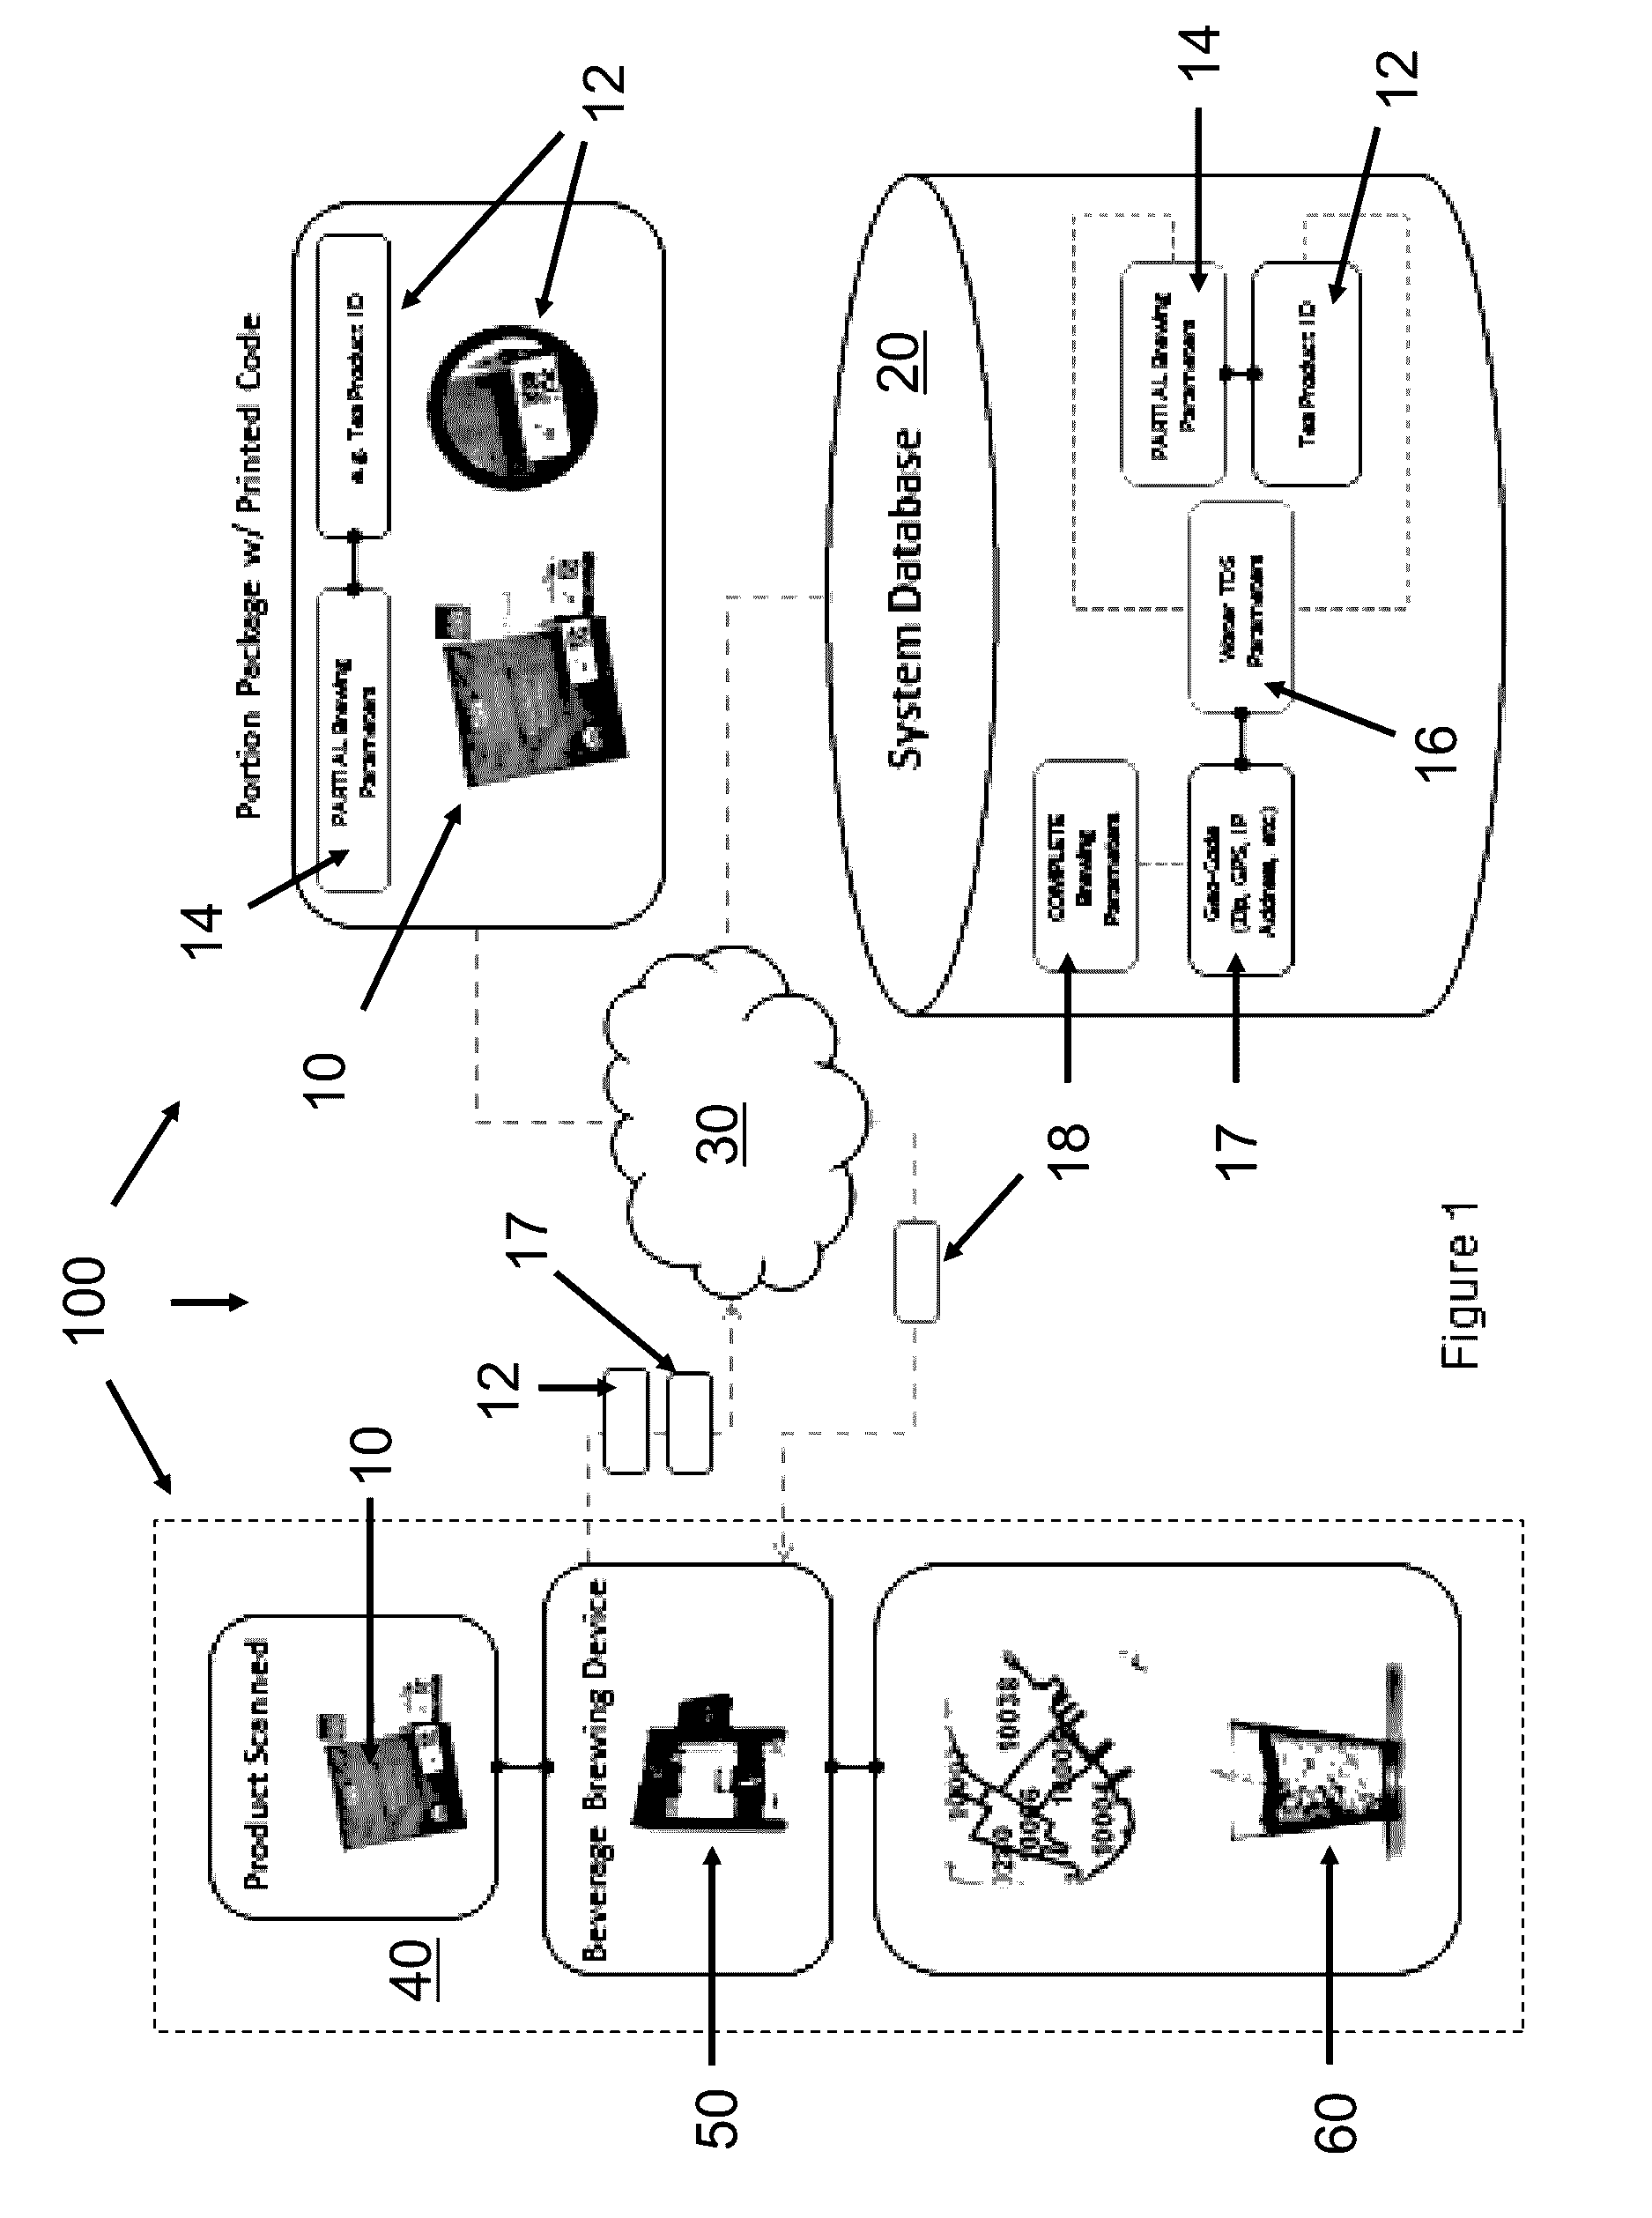 System and Method of Brewing Beverages Using Geo-Location Based Brewing Parameters